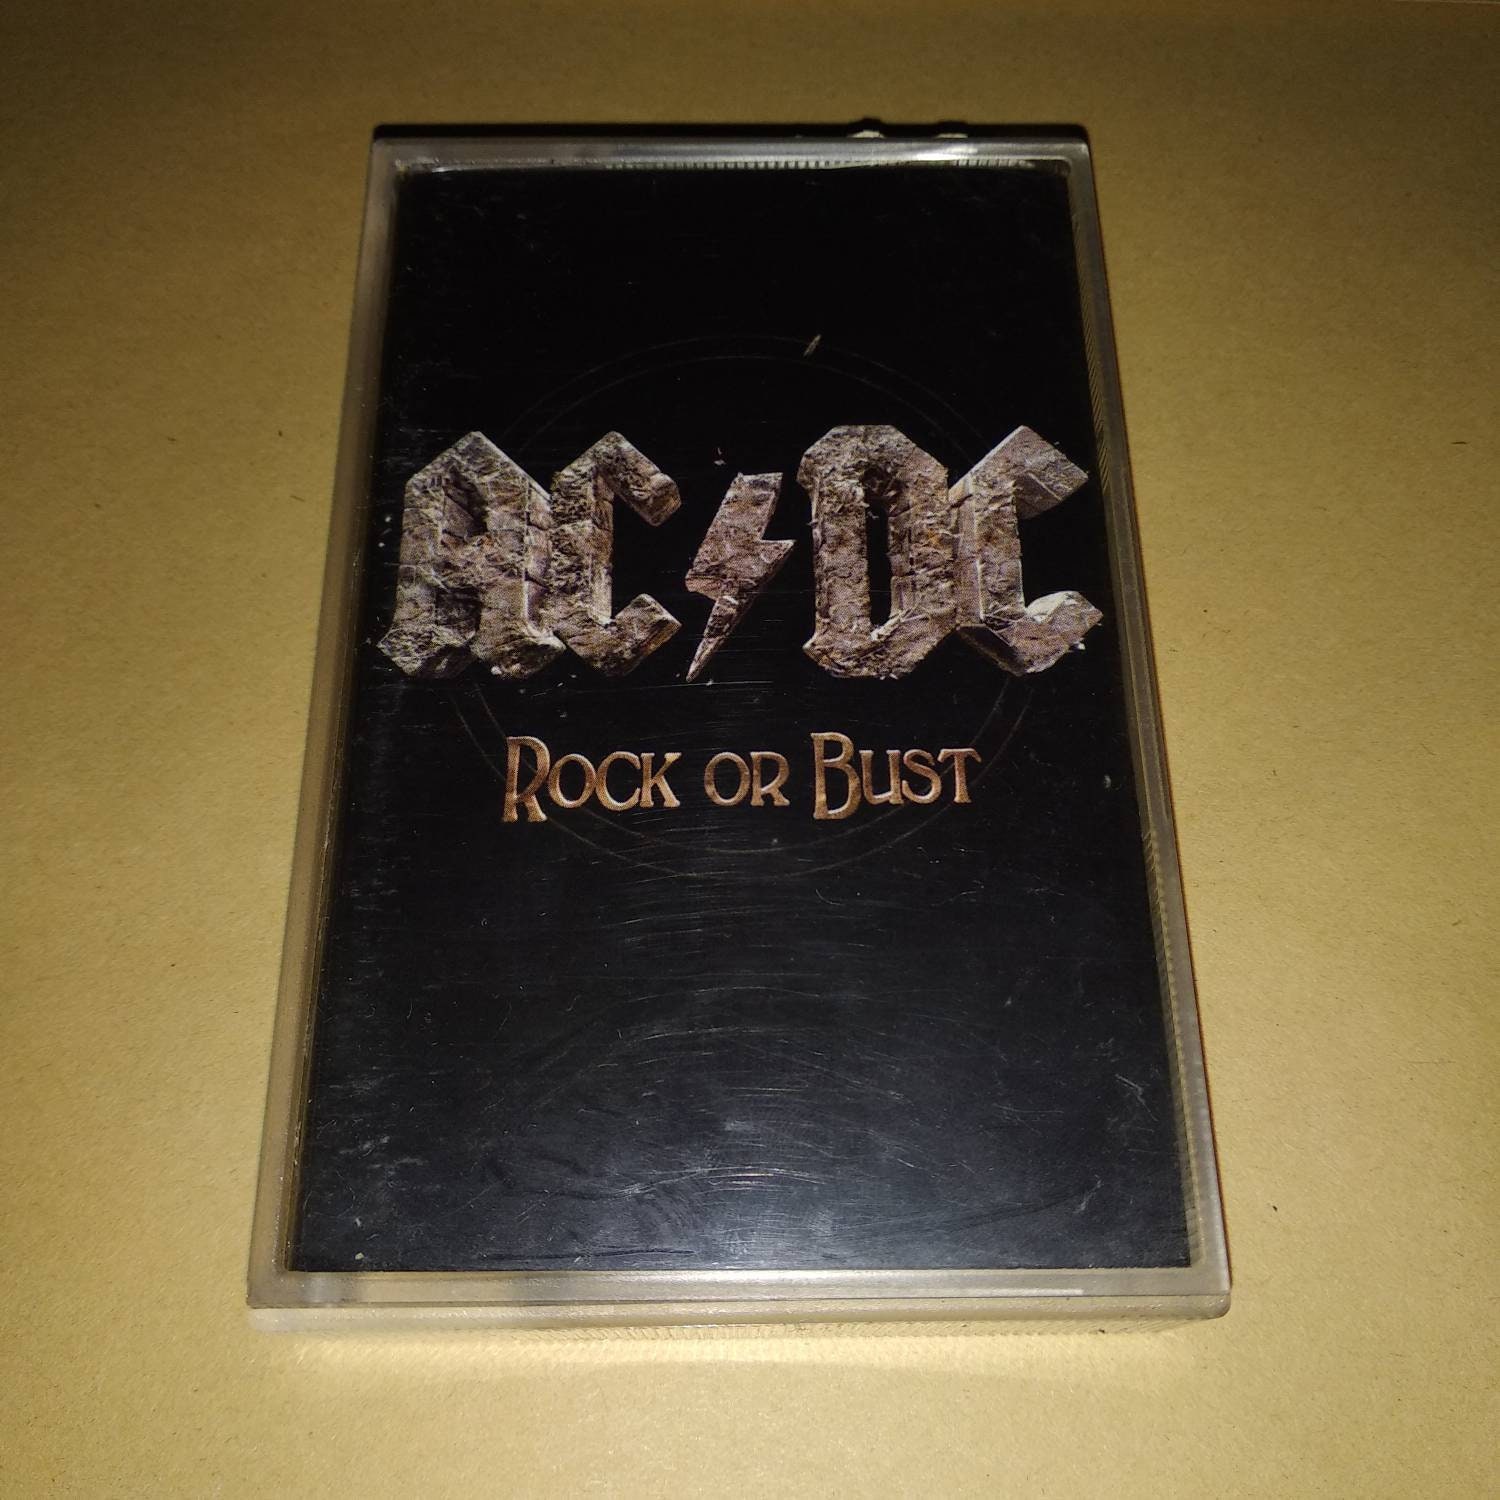 Acdc Rock Bust - Etsy